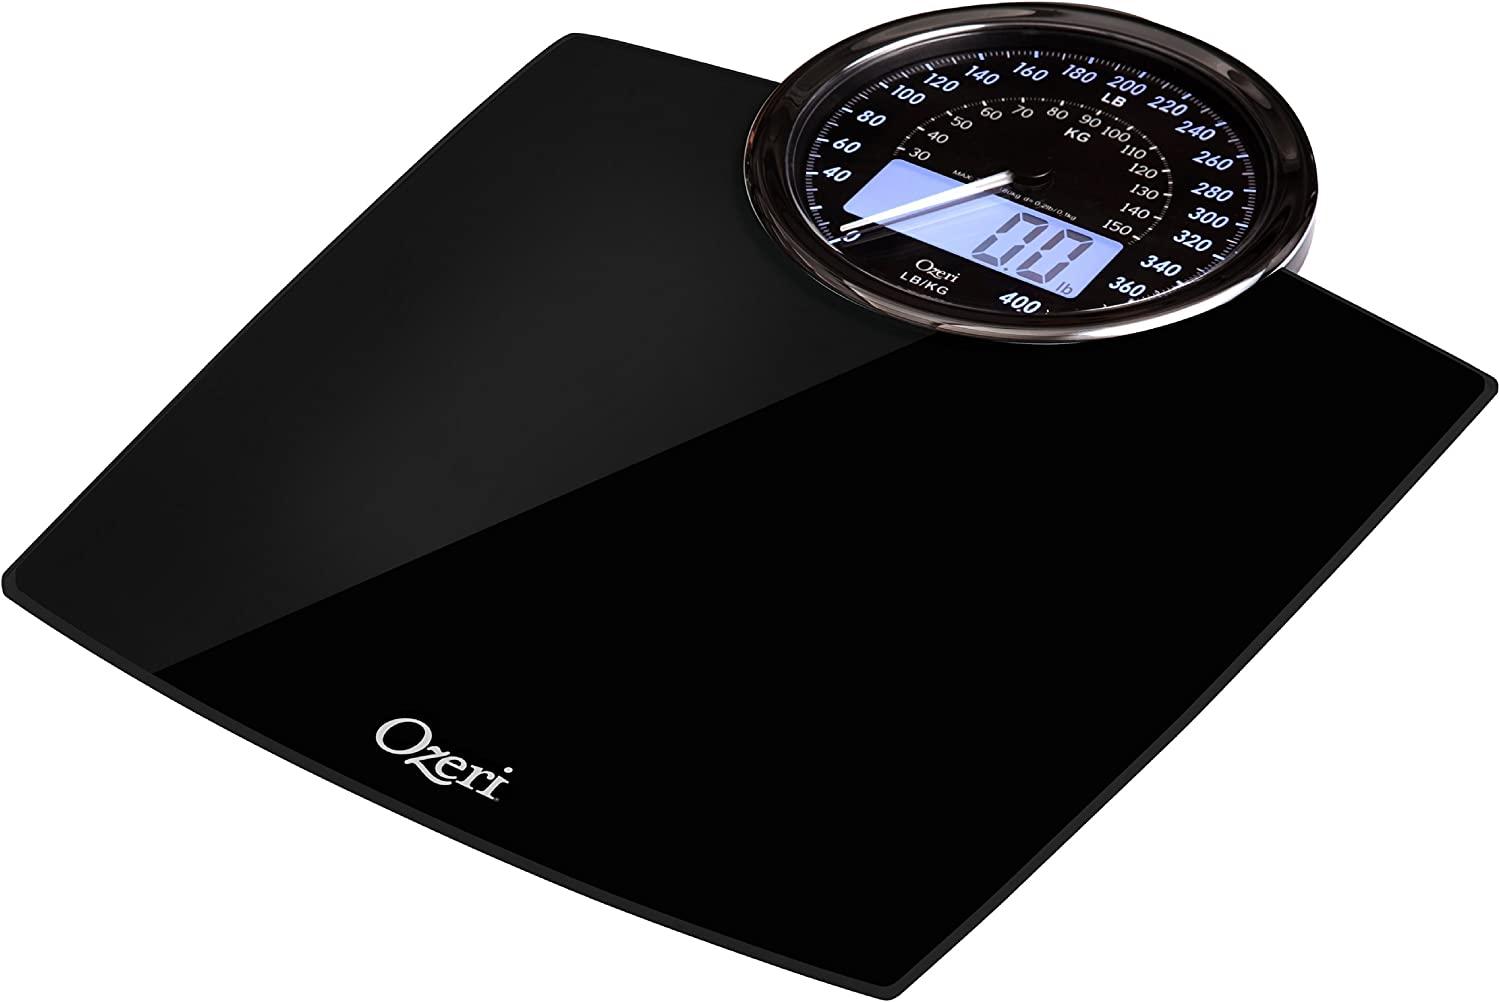 Ozeri Rev Digital Kitchen Scale with Electro-Mechanical Weight